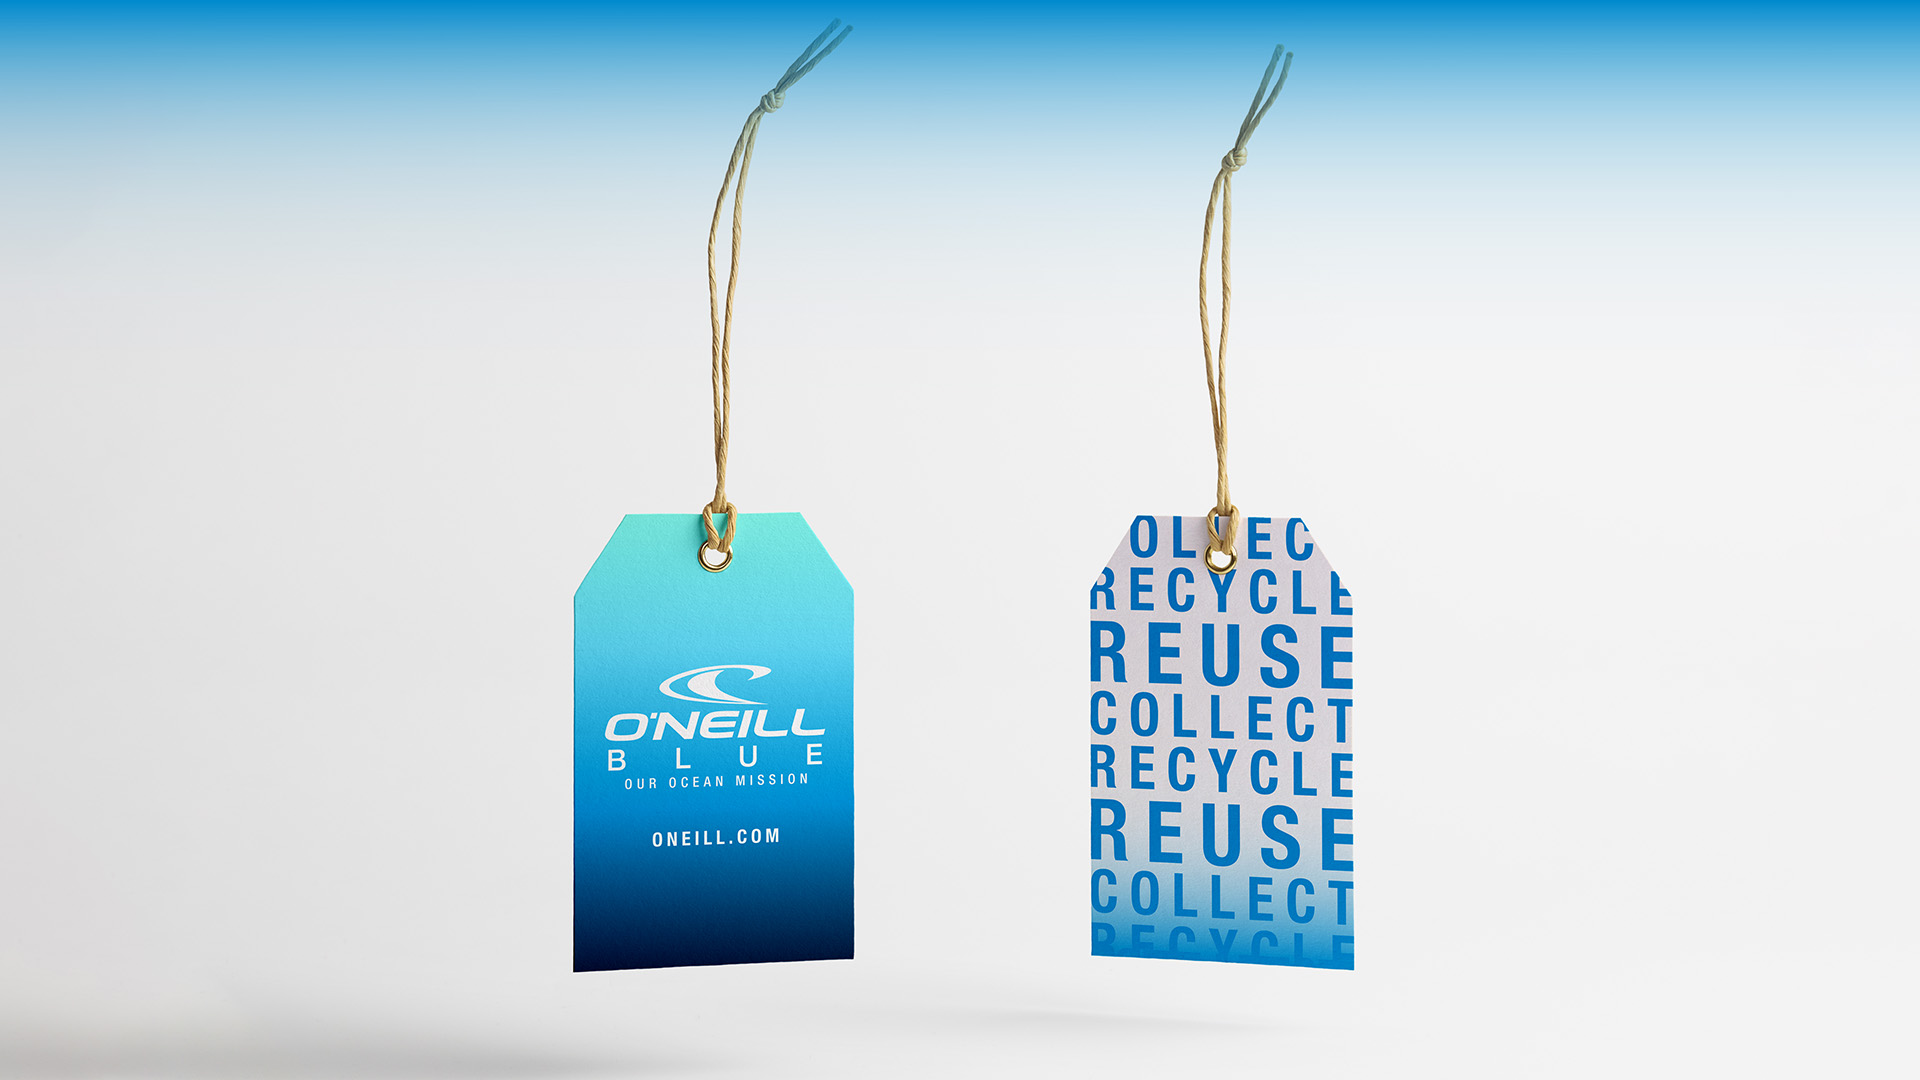 O'NEILL BLUE - OUR OCEAN MISSION